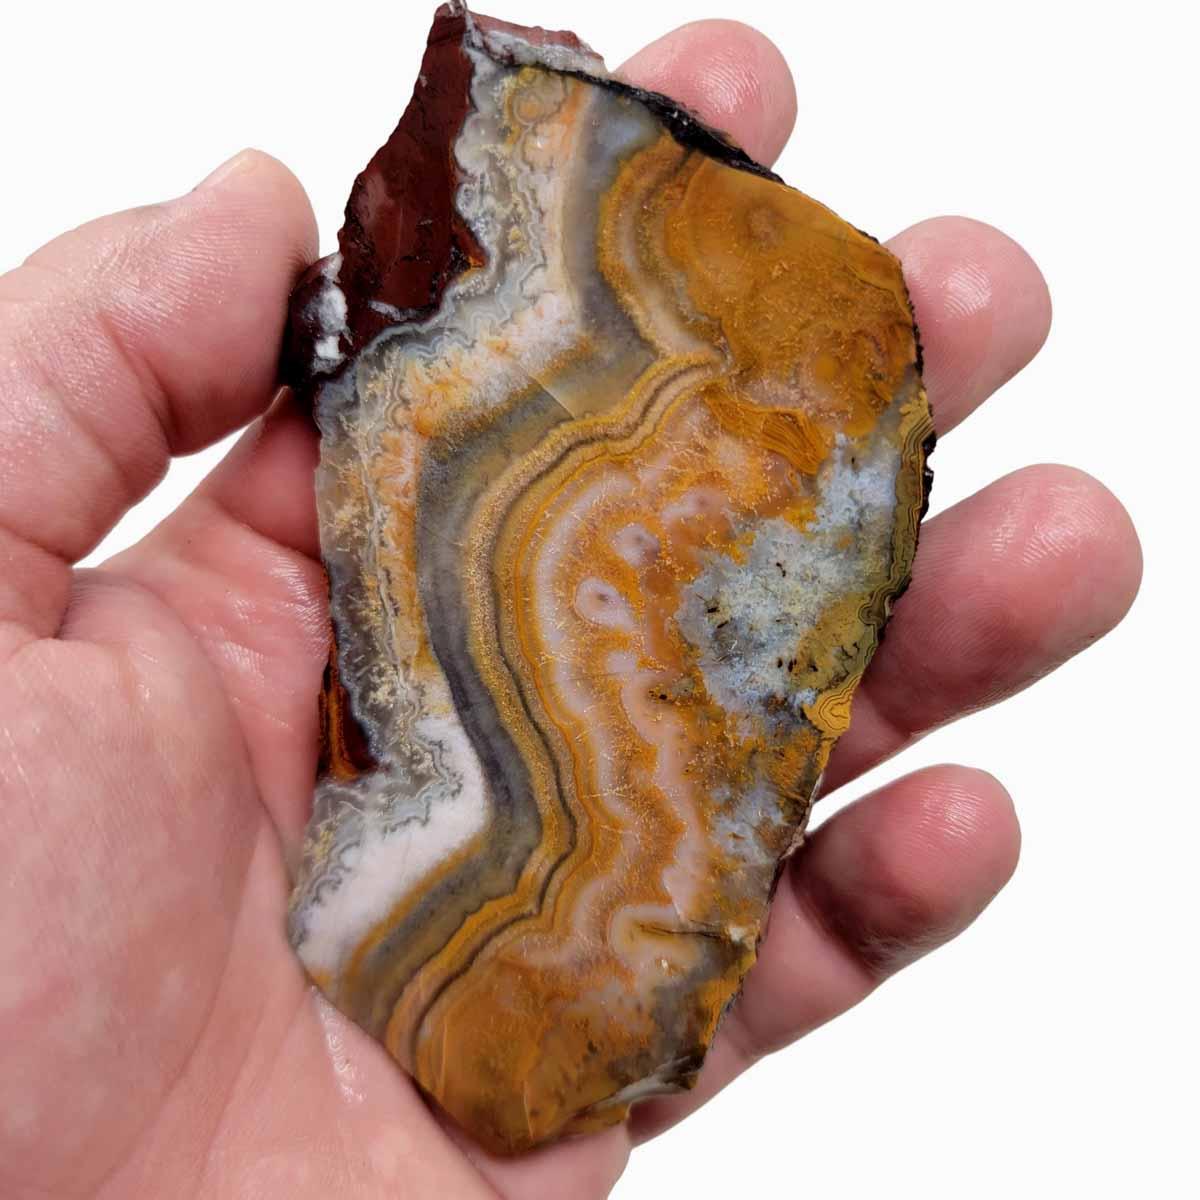 Flor de Durazno Flower of Peach Lace Agate Slab!  Lapidary Stone Slab! - LapidaryCentral